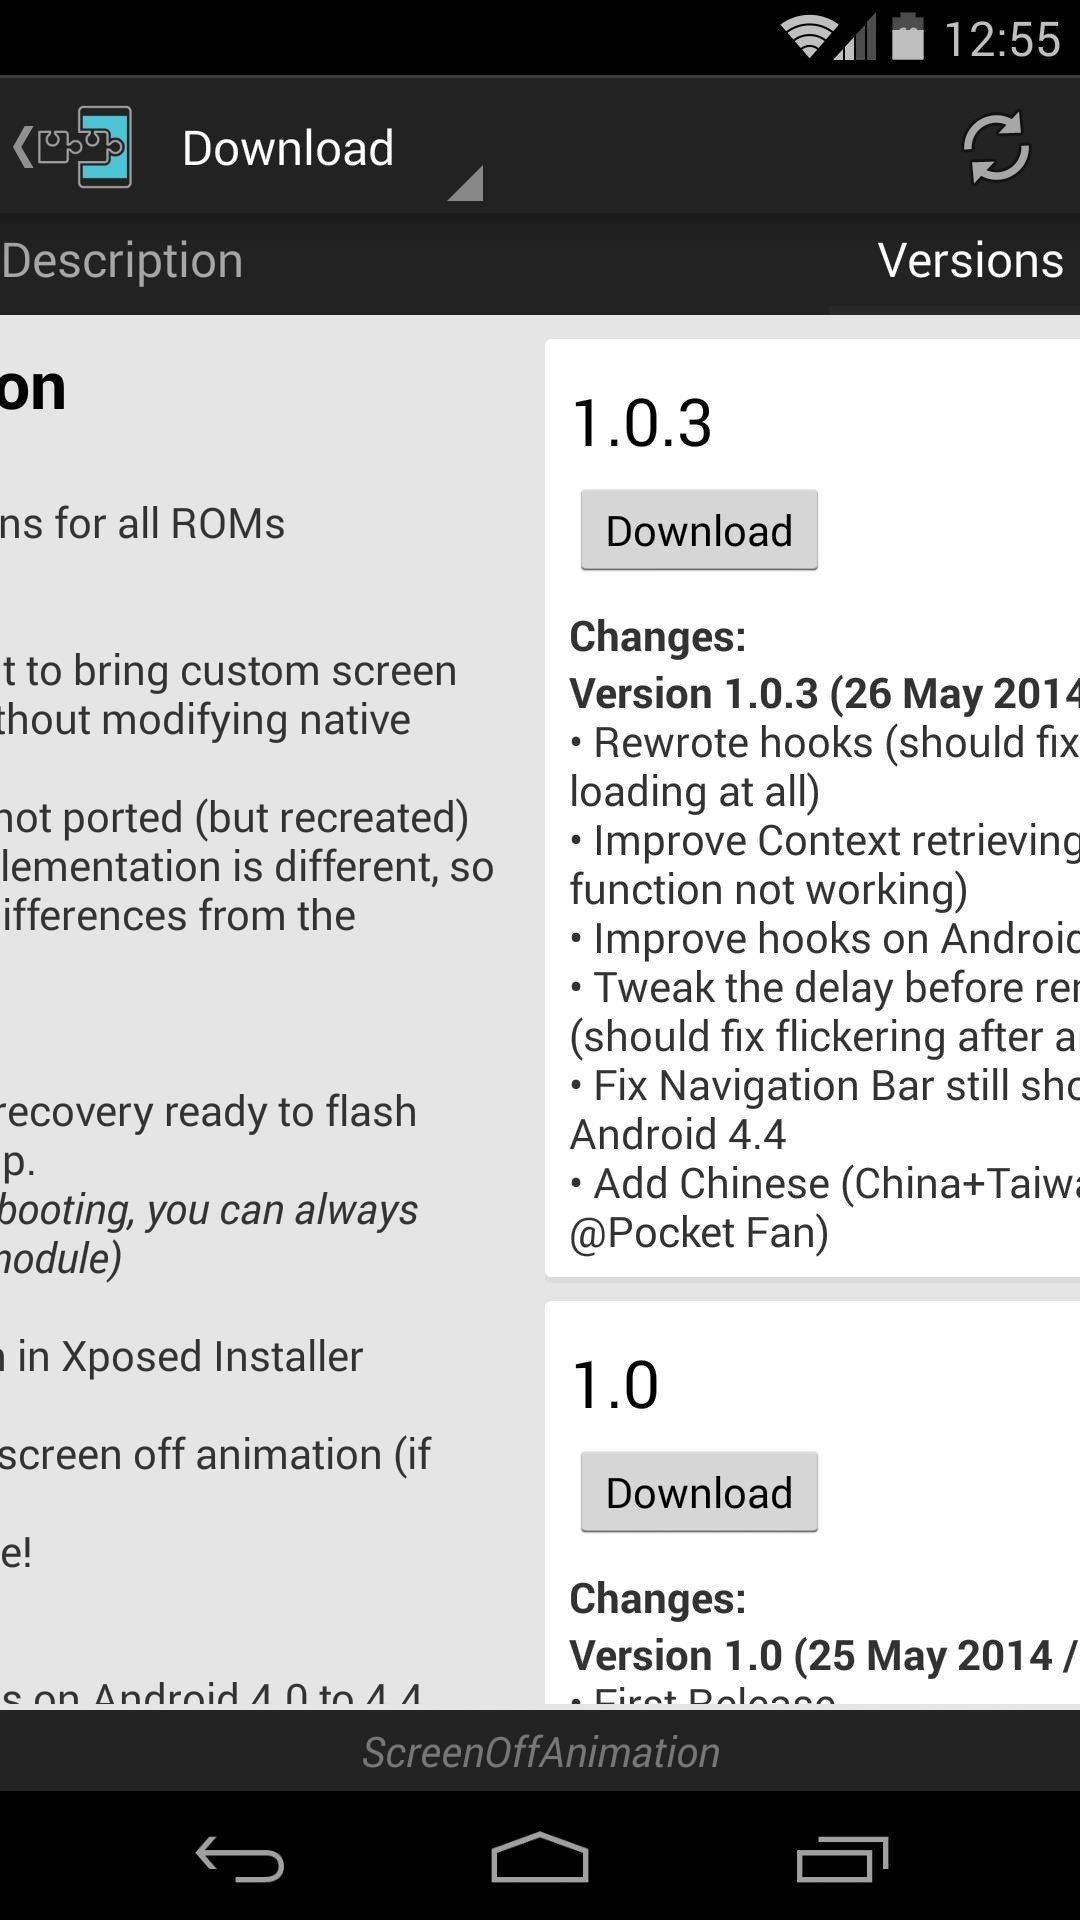 How to Get Custom Screen-Off Effects for Your Nexus 5 or Other Android Device